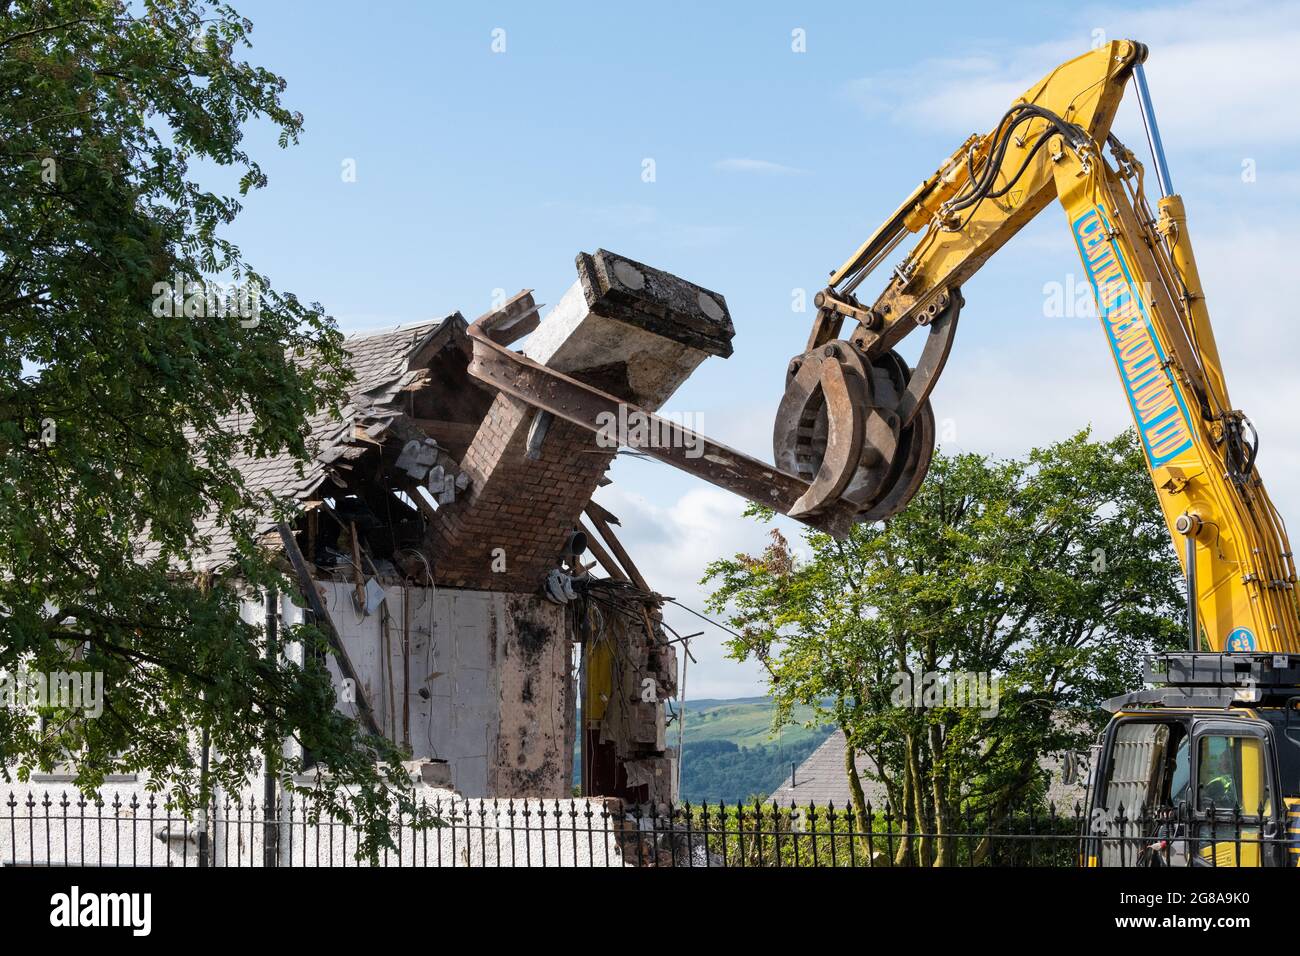 Black Bull hotel and public house demolition in the Stirlingshire village of Killearn to make way for residential apartments, Scotland, UK Stock Photo